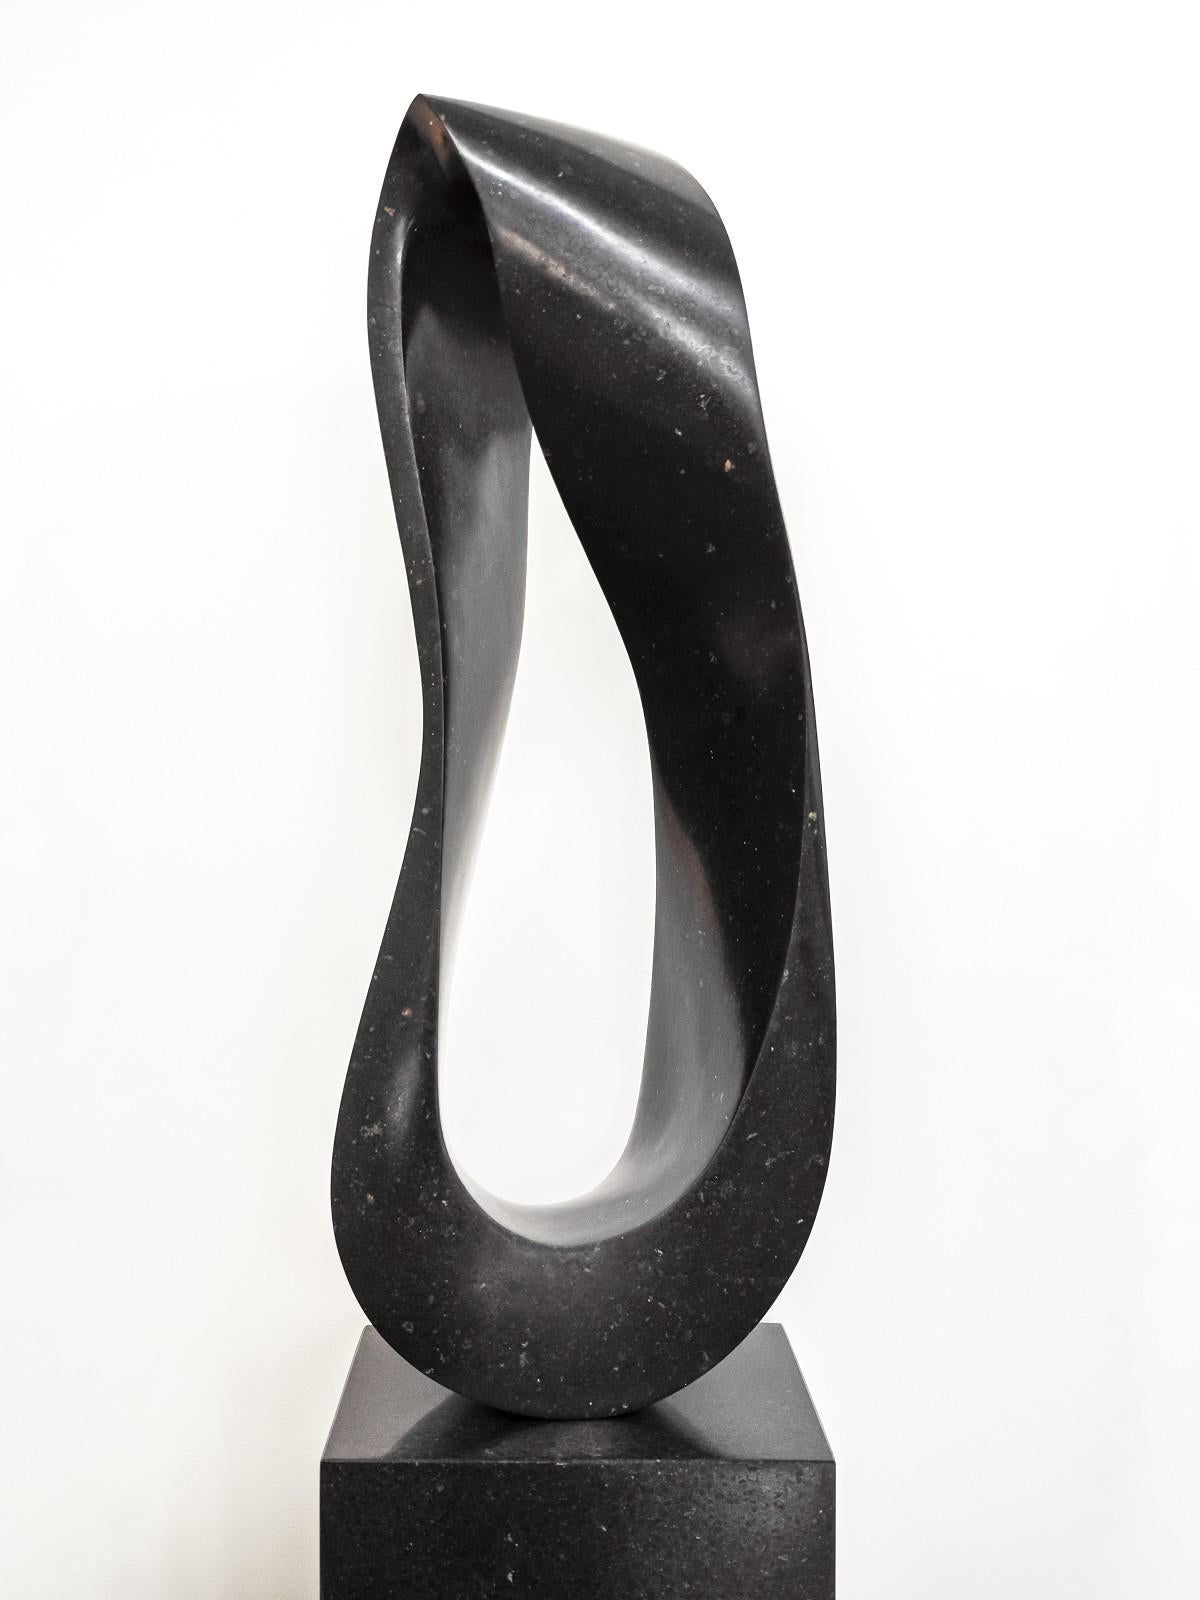 Mobius H3 13/50 - smooth, elegant, black granite, abstract sculpture on plinth - Contemporary Sculpture by Jeremy Guy